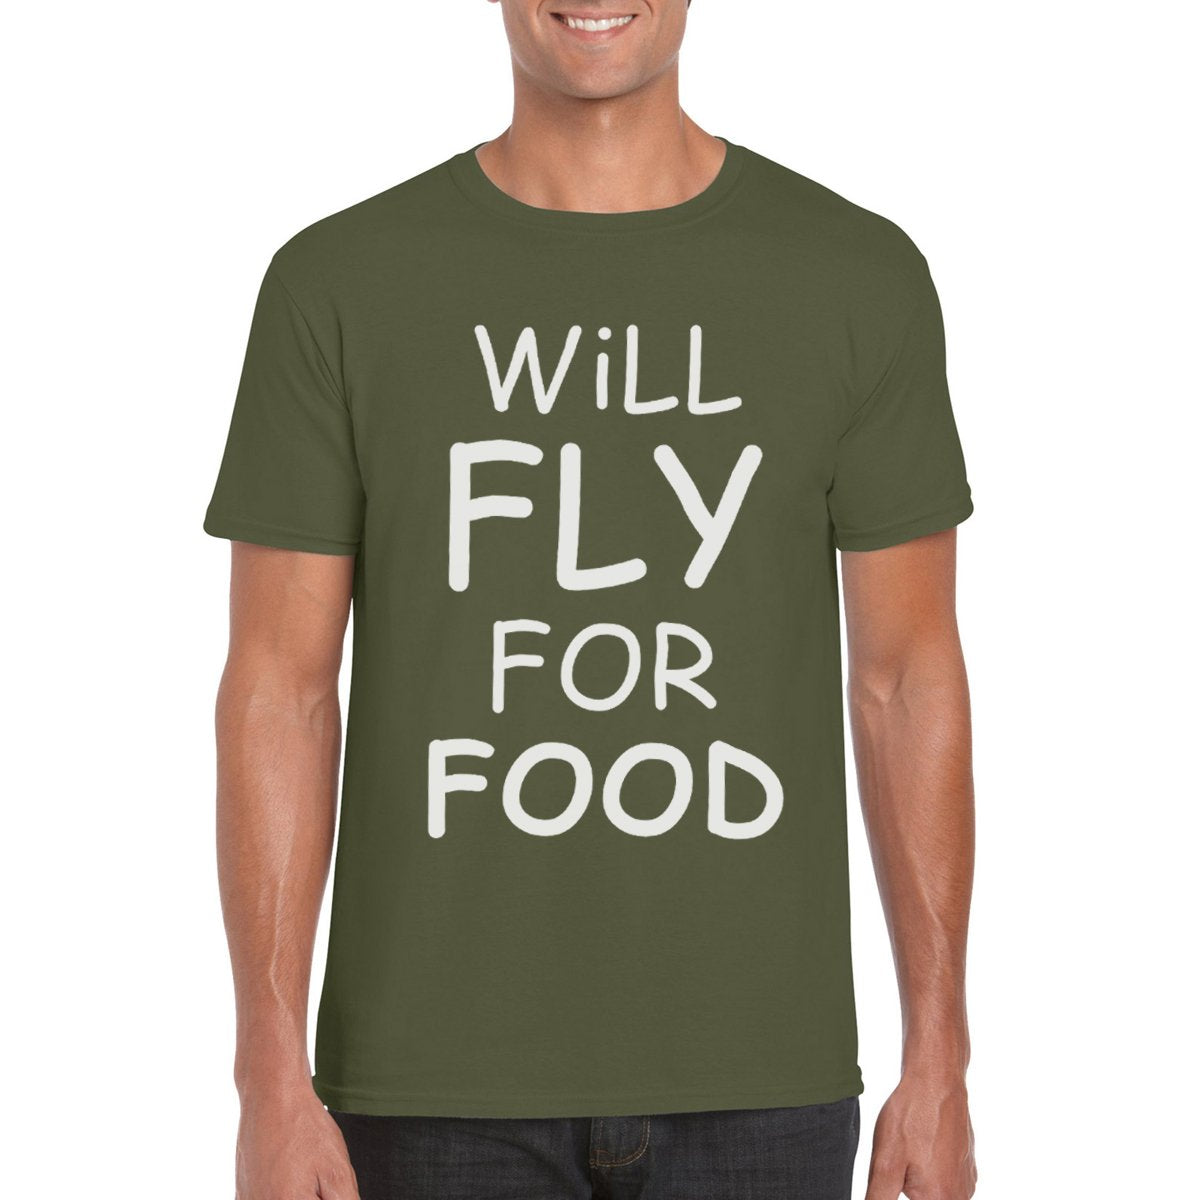 WILL FLY FOR FOOD Unisex Semi-Fitted T-Shirt